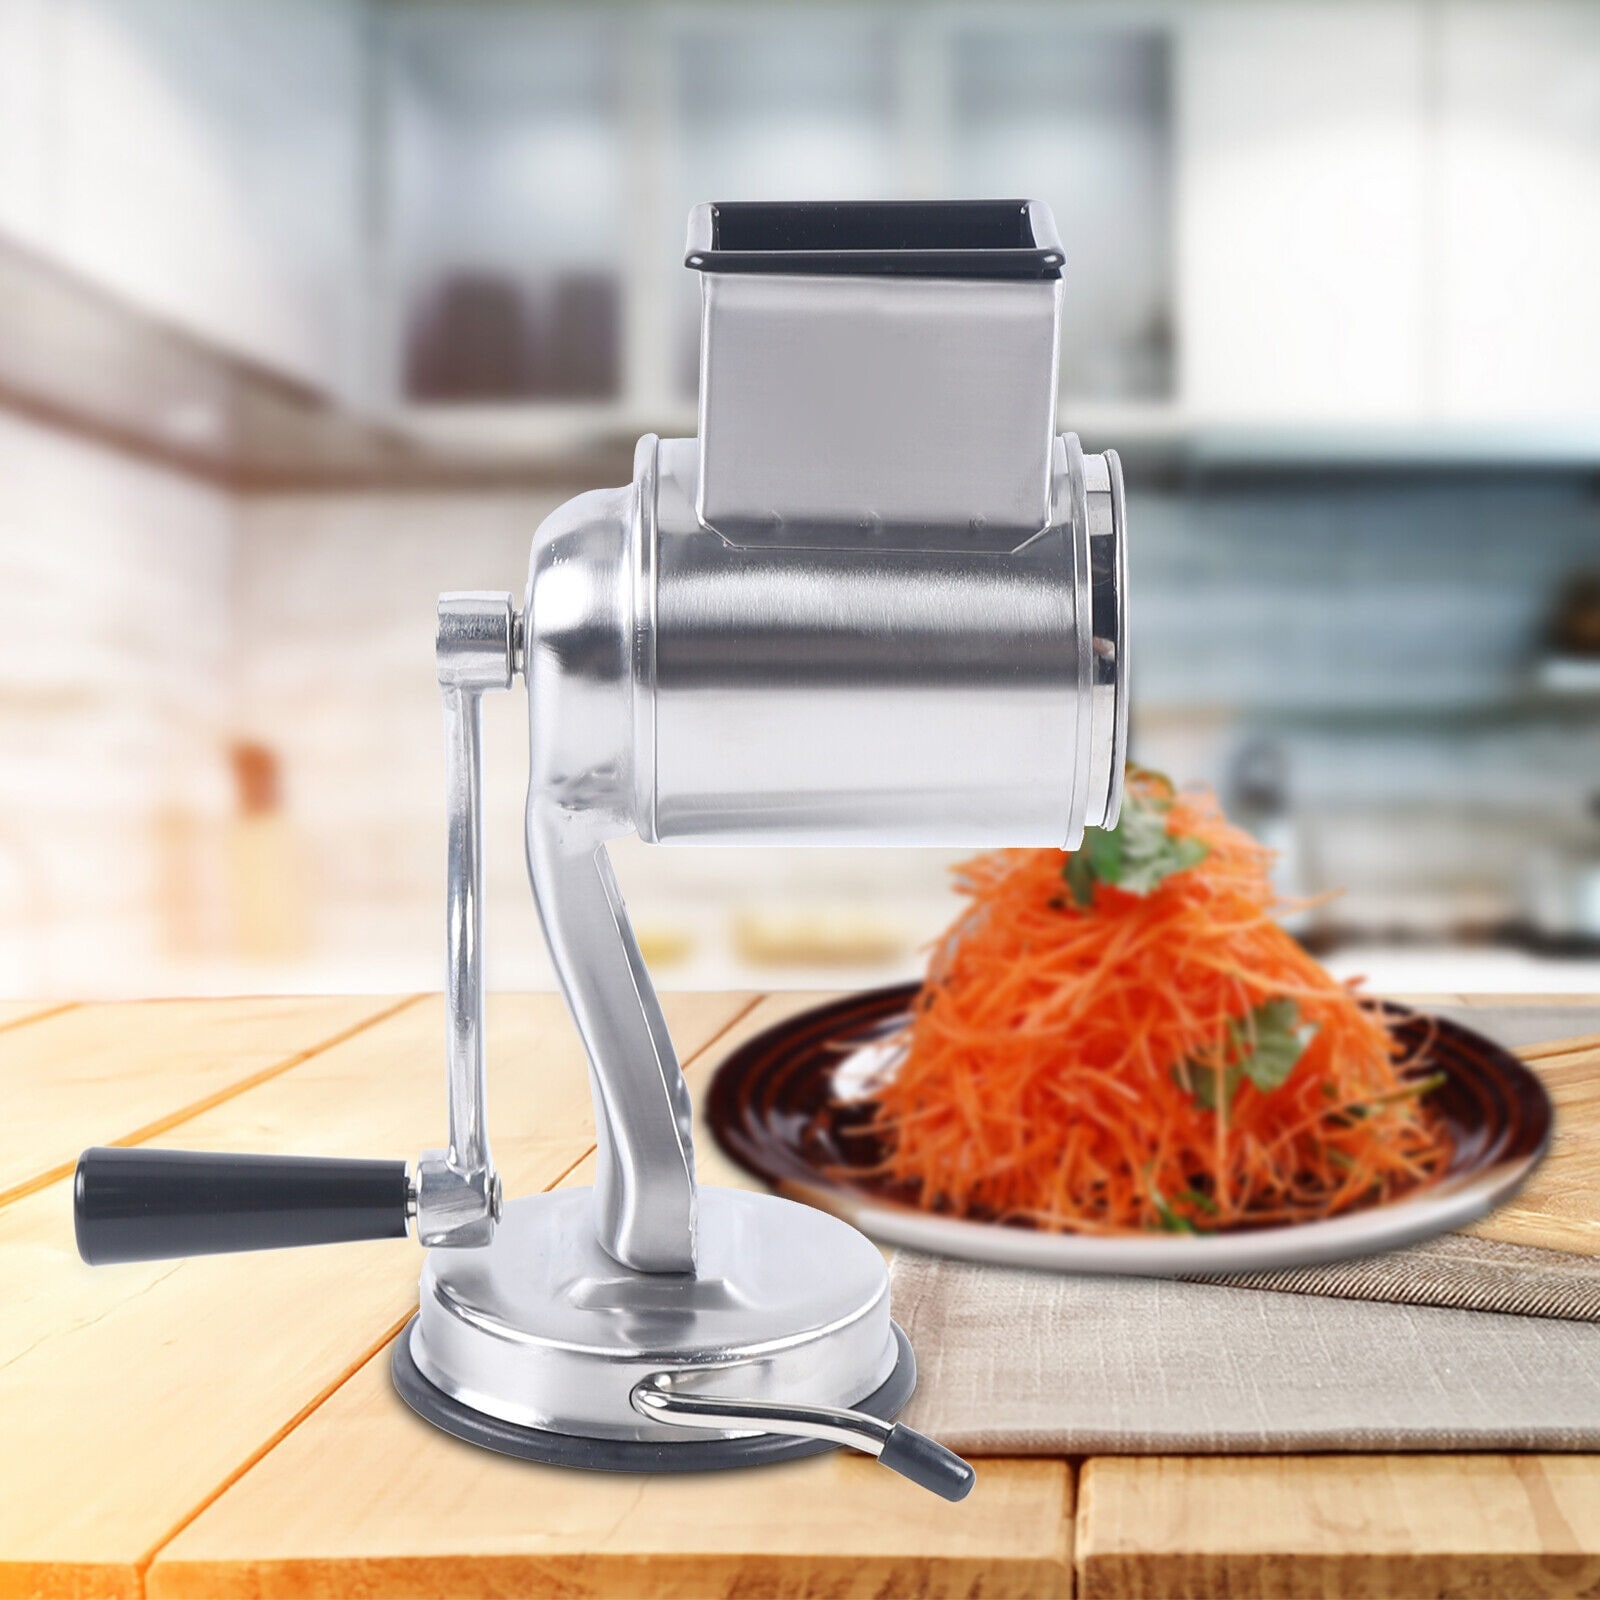 https://ak1.ostkcdn.com/images/products/is/images/direct/99f8c96935bd92b991b918b1bcffe23b85414060/Rotary-Grater-Food-Mills-Grinder-with-5-Drum-Blade-Grinding-Tool-Set.jpg